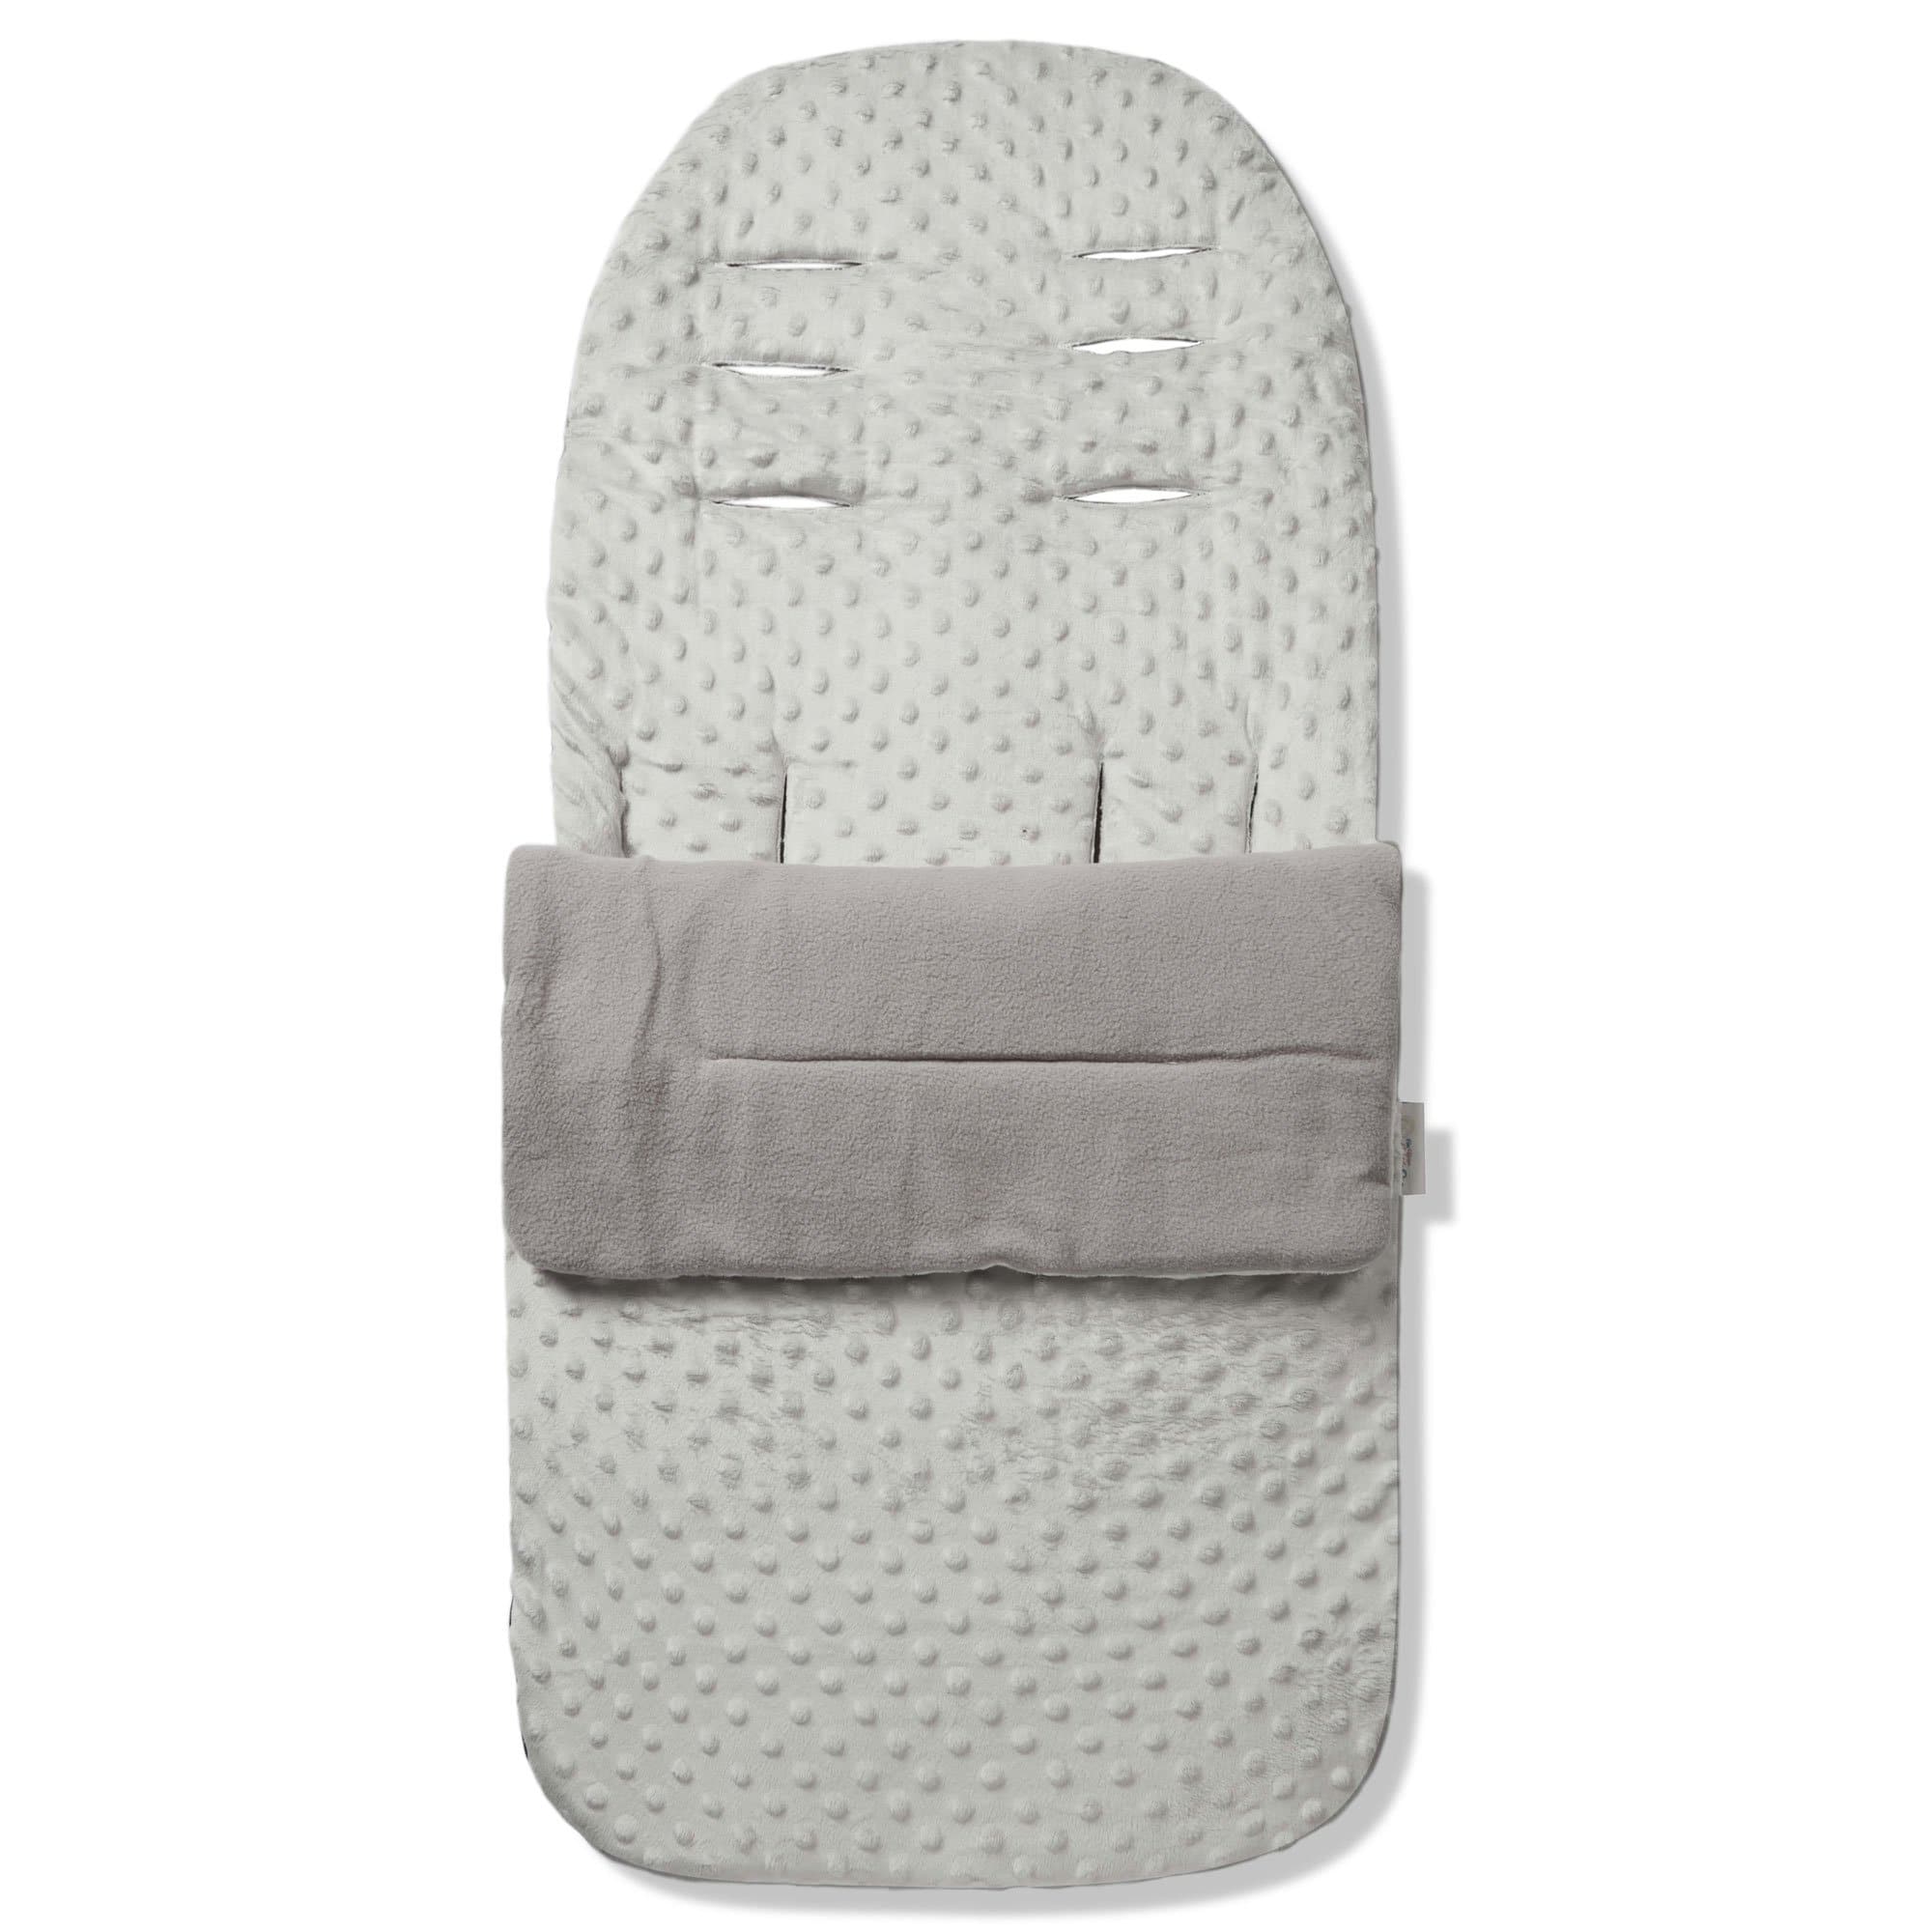 Dimple Footmuff / Cosy Toes Compatible with Koelstra - Grey / Fits All Models | For Your Little One